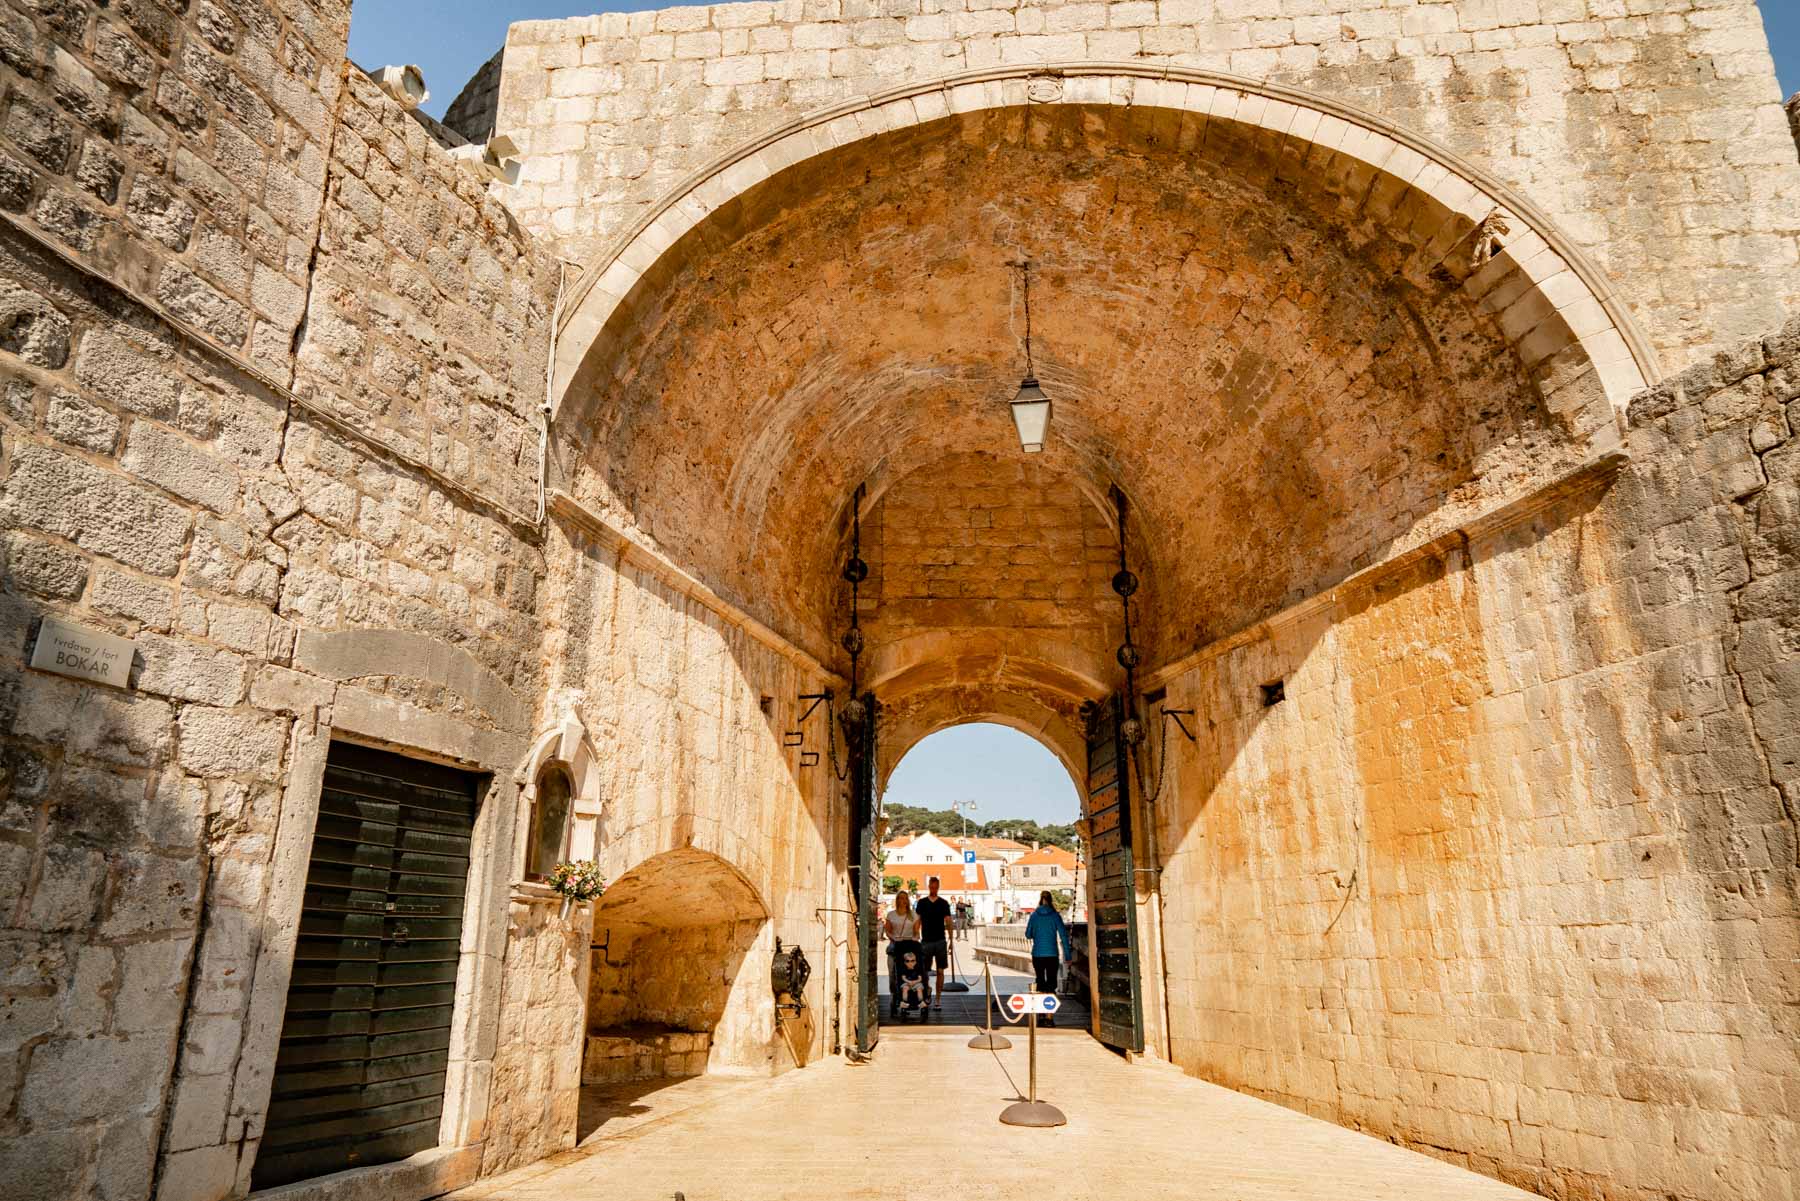 Dubrovnik Game of Thrones filming locations